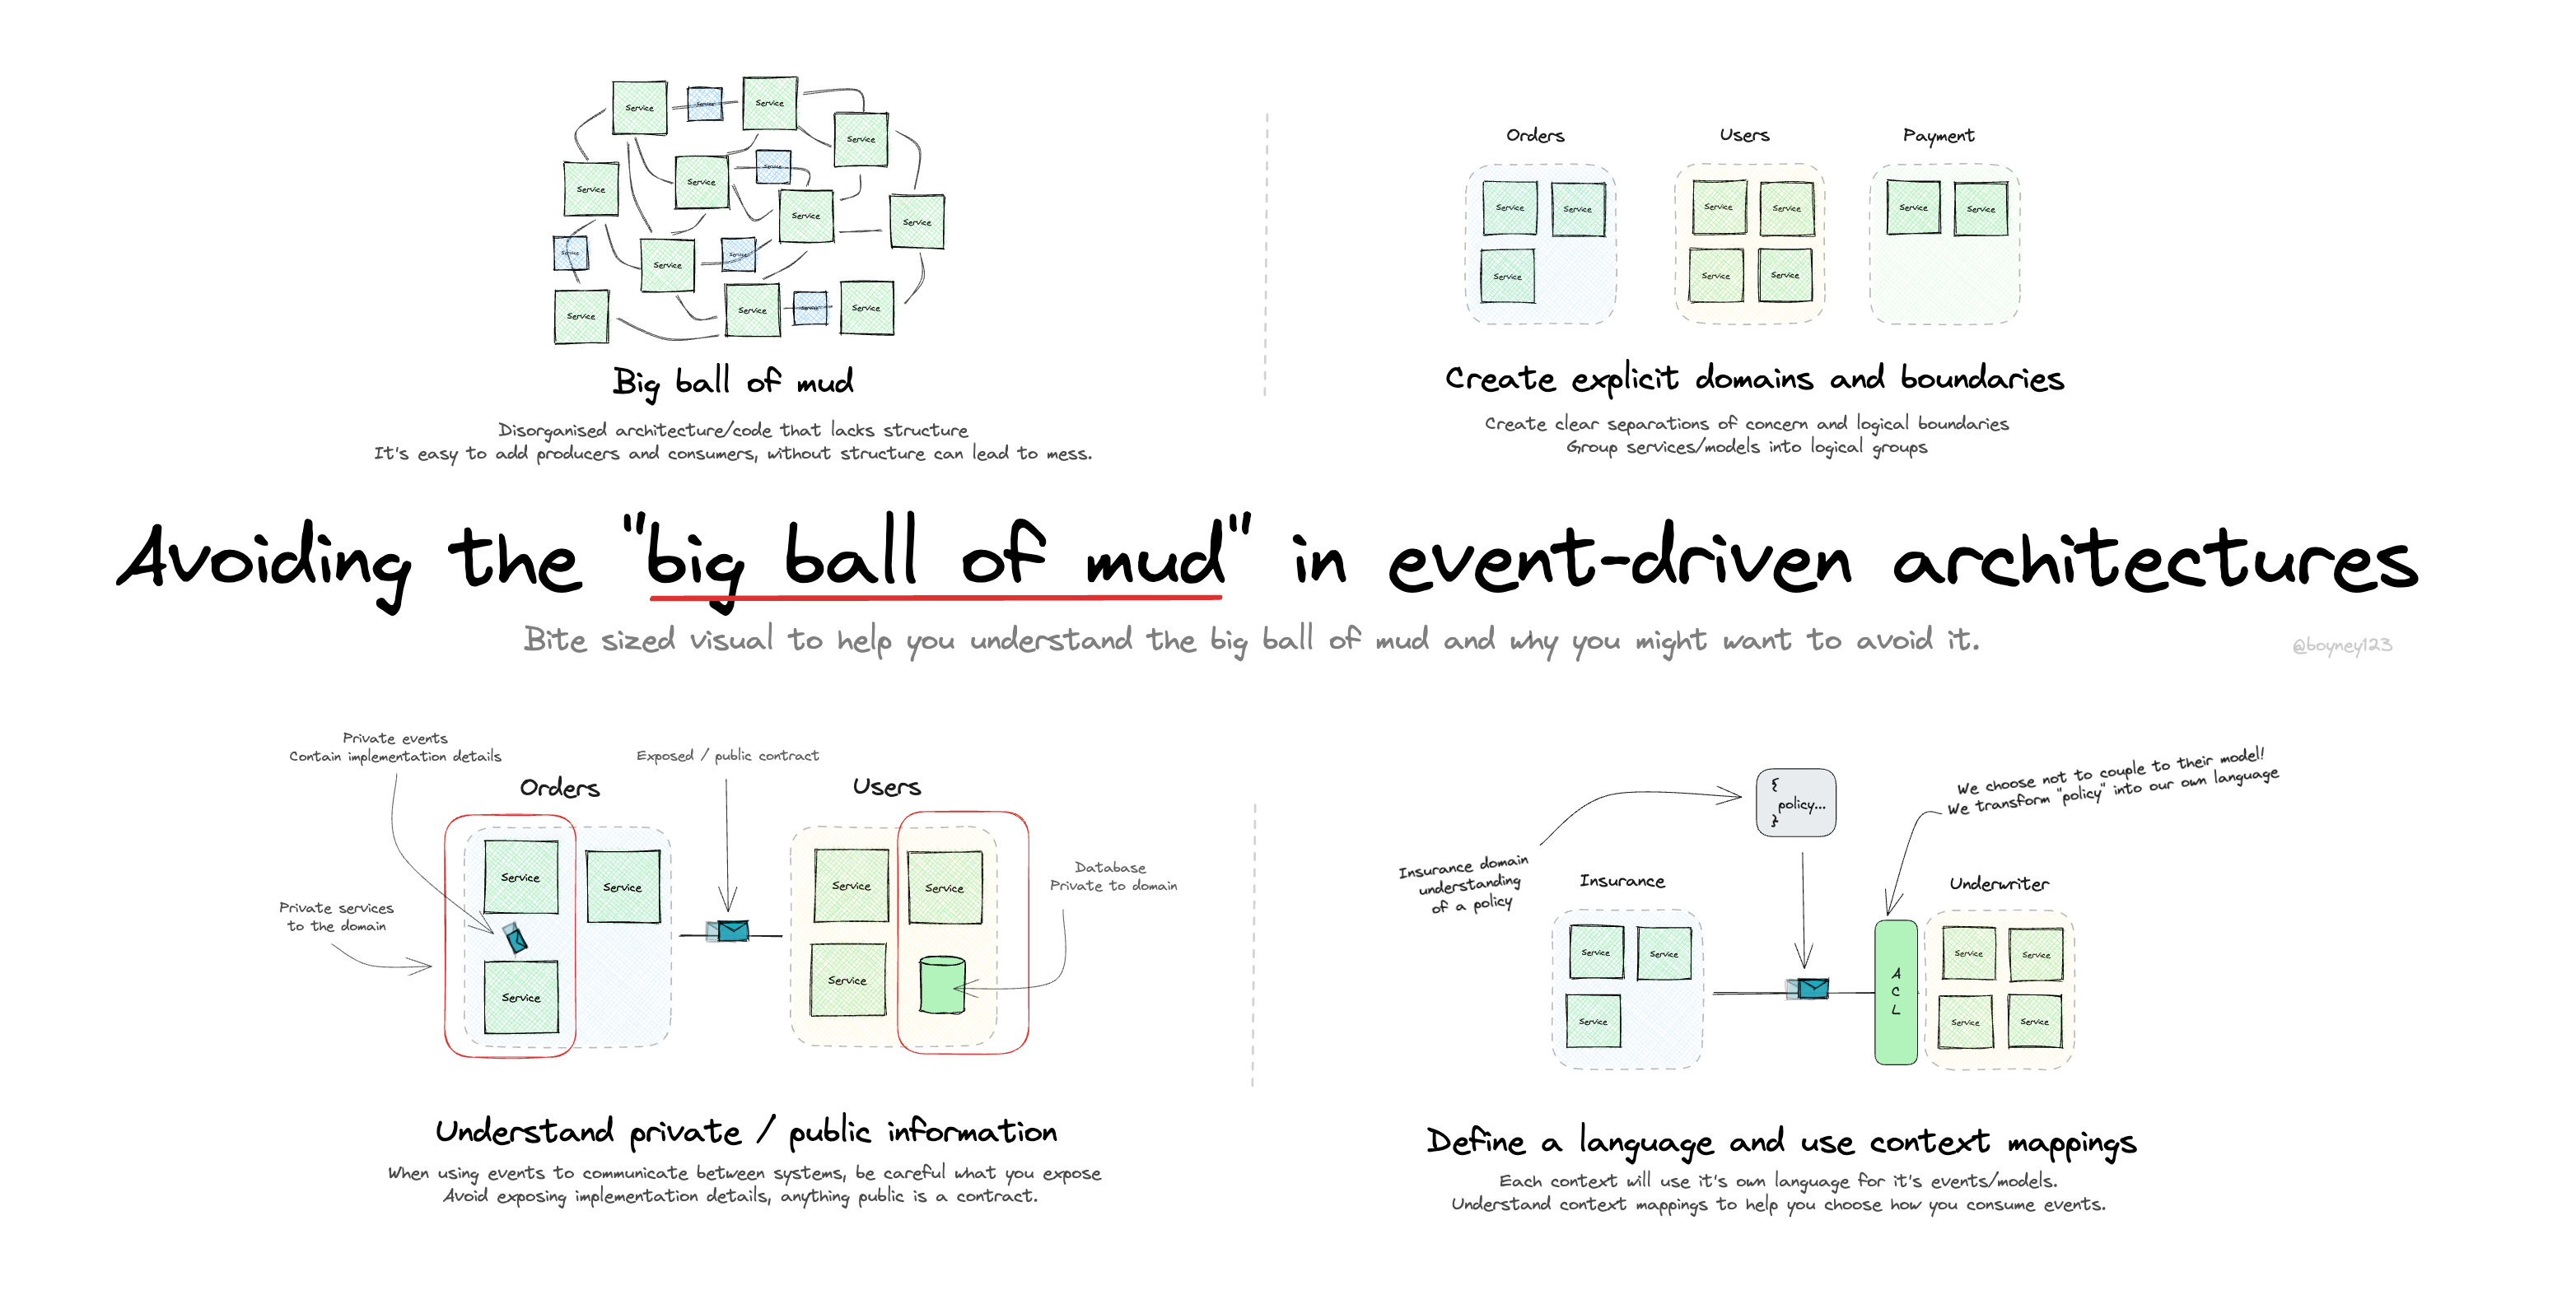 Avoiding the big ball of mud in event-driven architectures